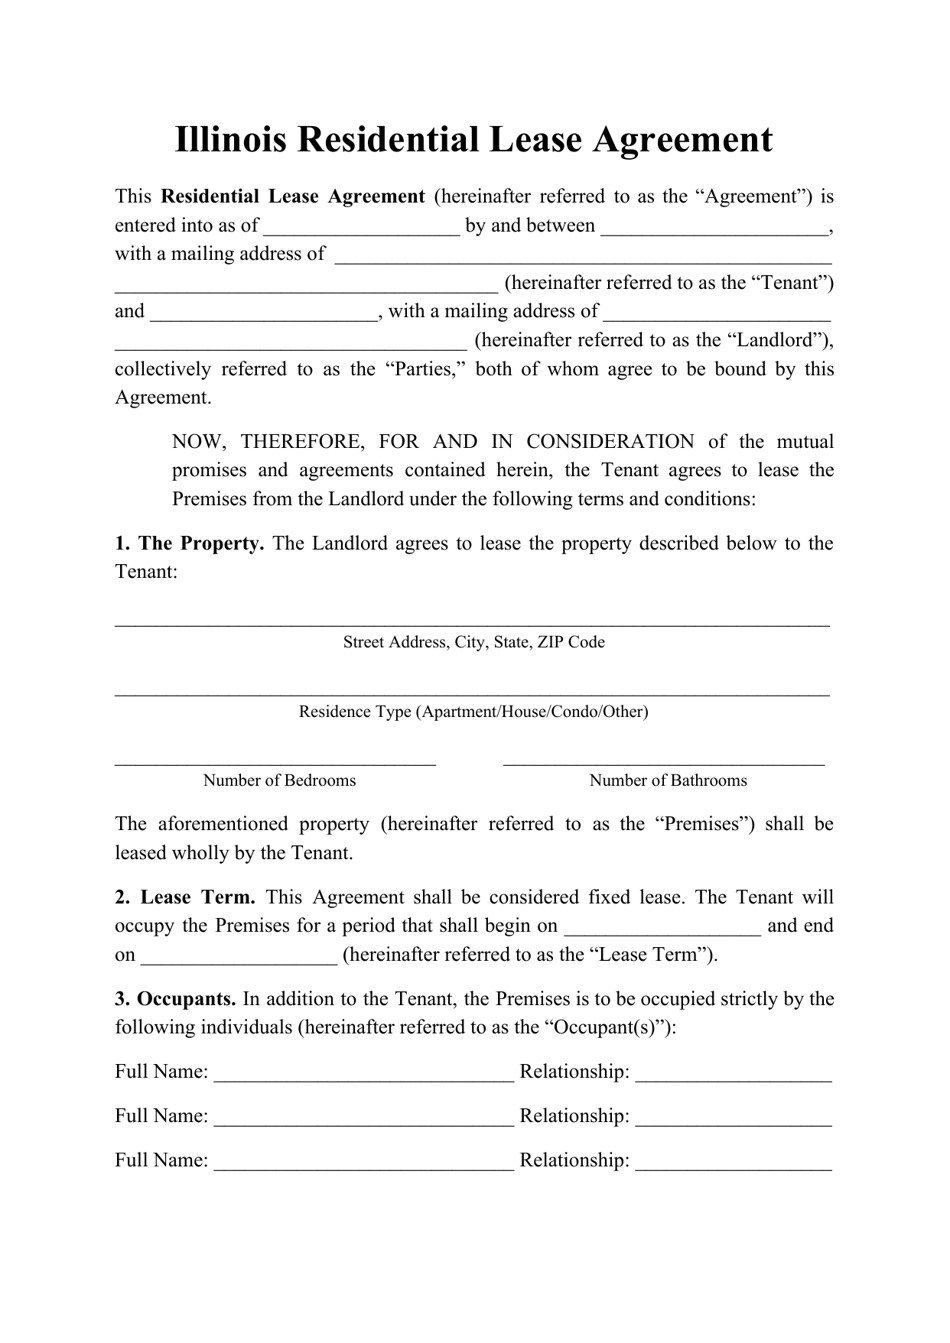 Illinois Residential Lease Agreement Template Fill Out Sign Online